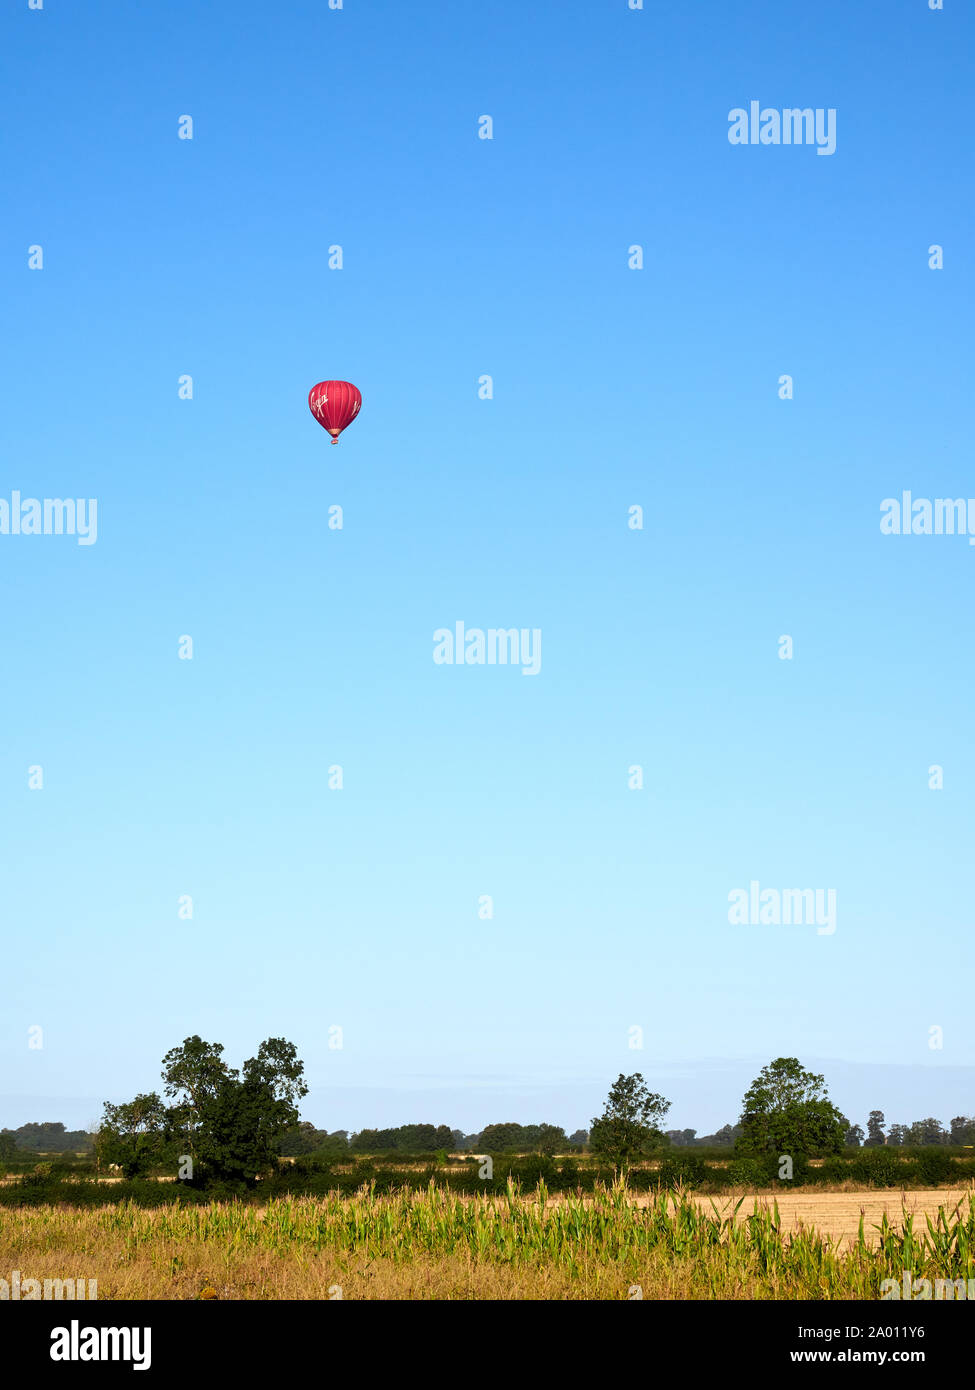 A red hot air balloon over farmland near Grantham in Lincolnshire against the vibrant clear blue sky Stock Photo